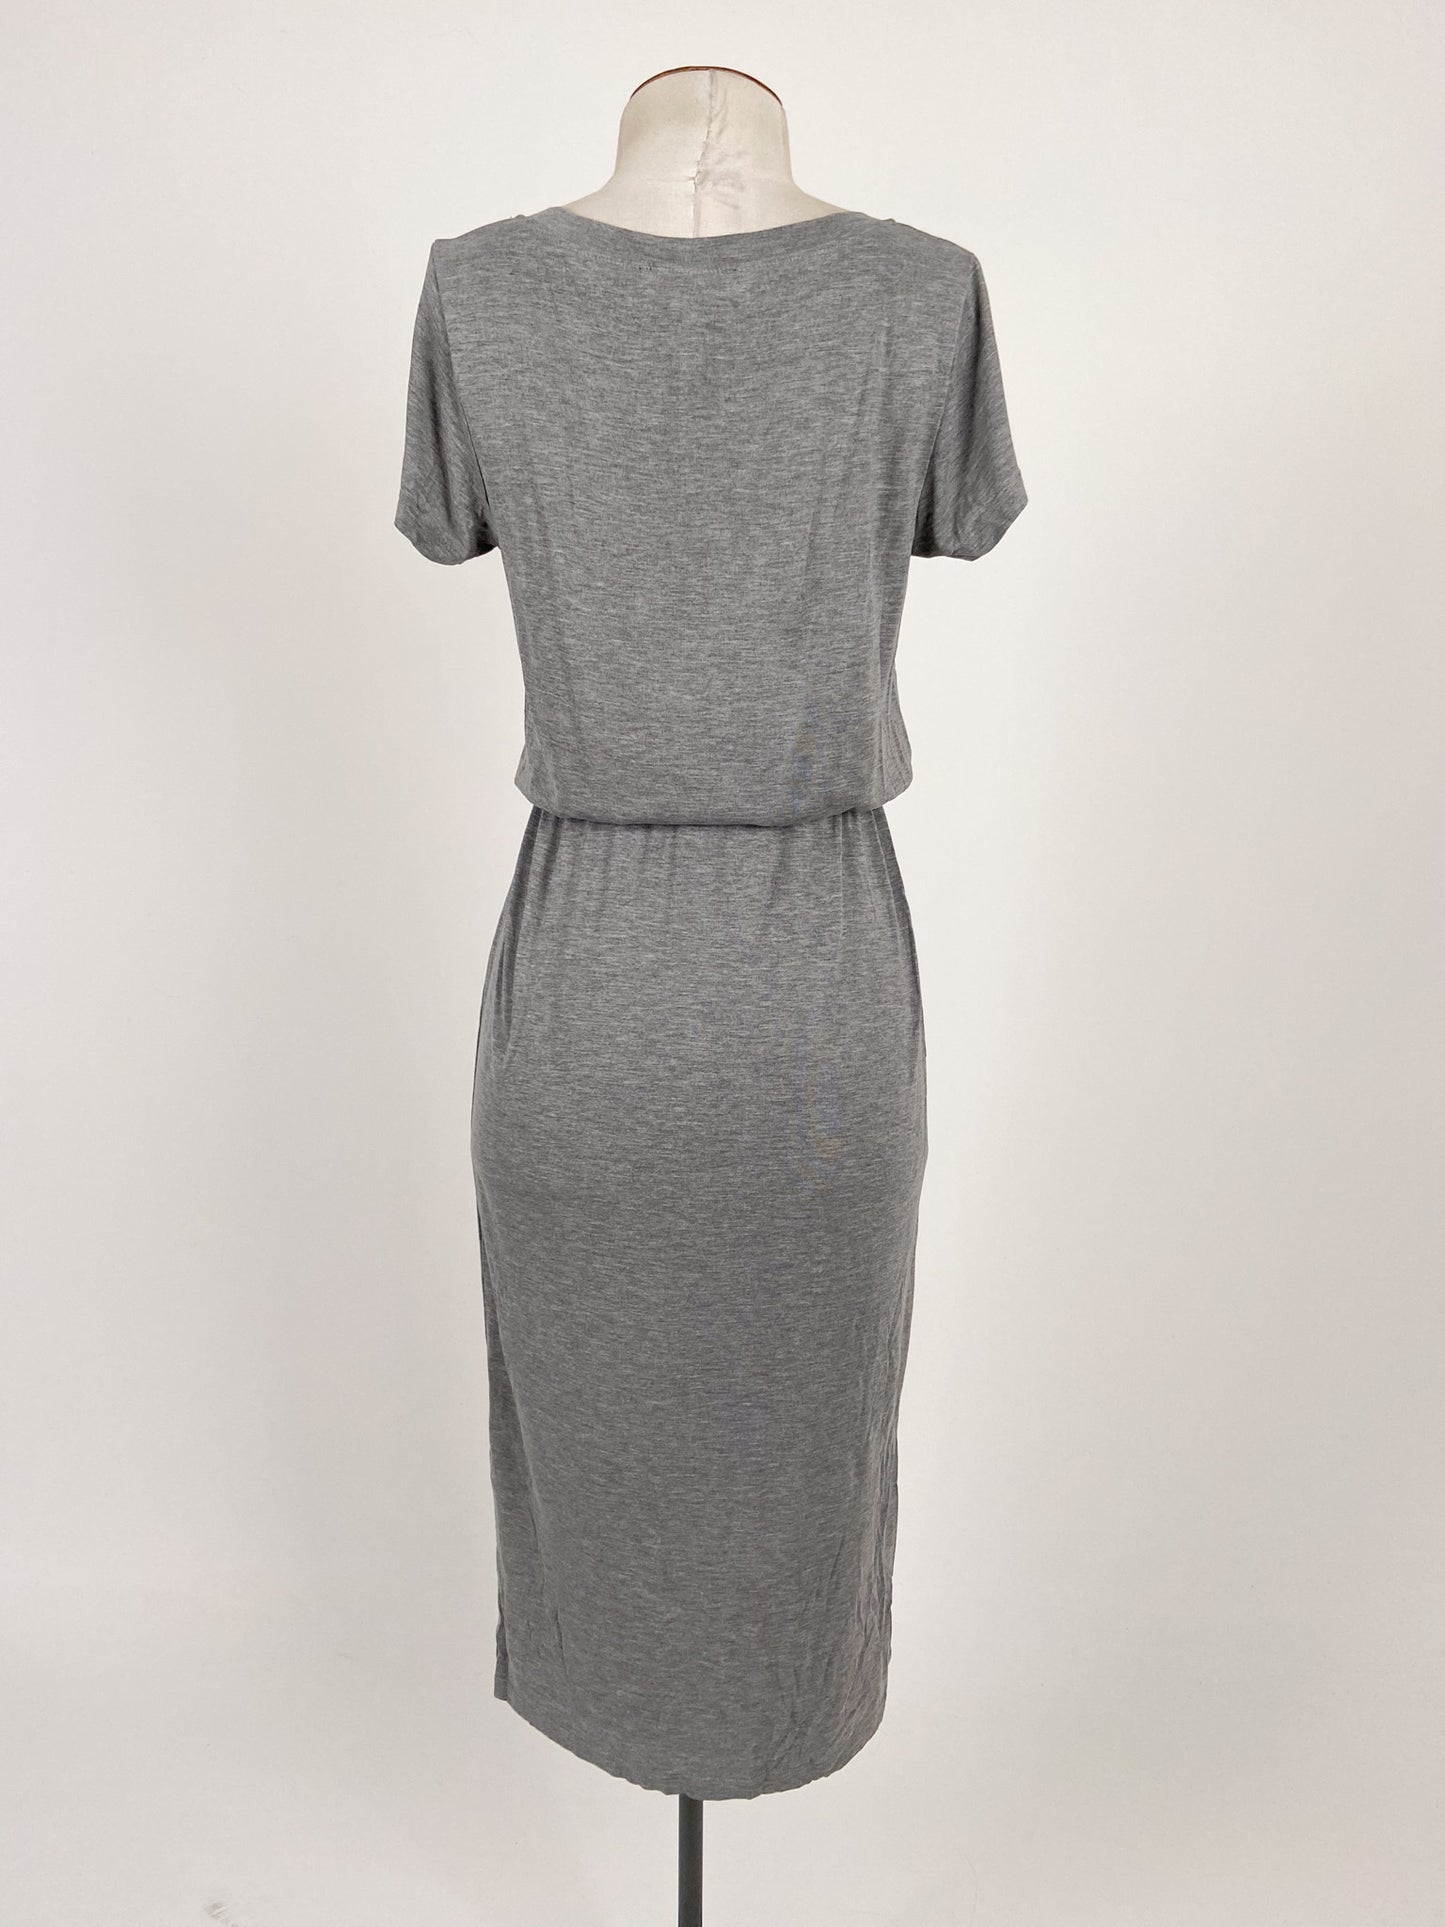 Forever 21 | Grey Casual/Workwear Dress | Size S